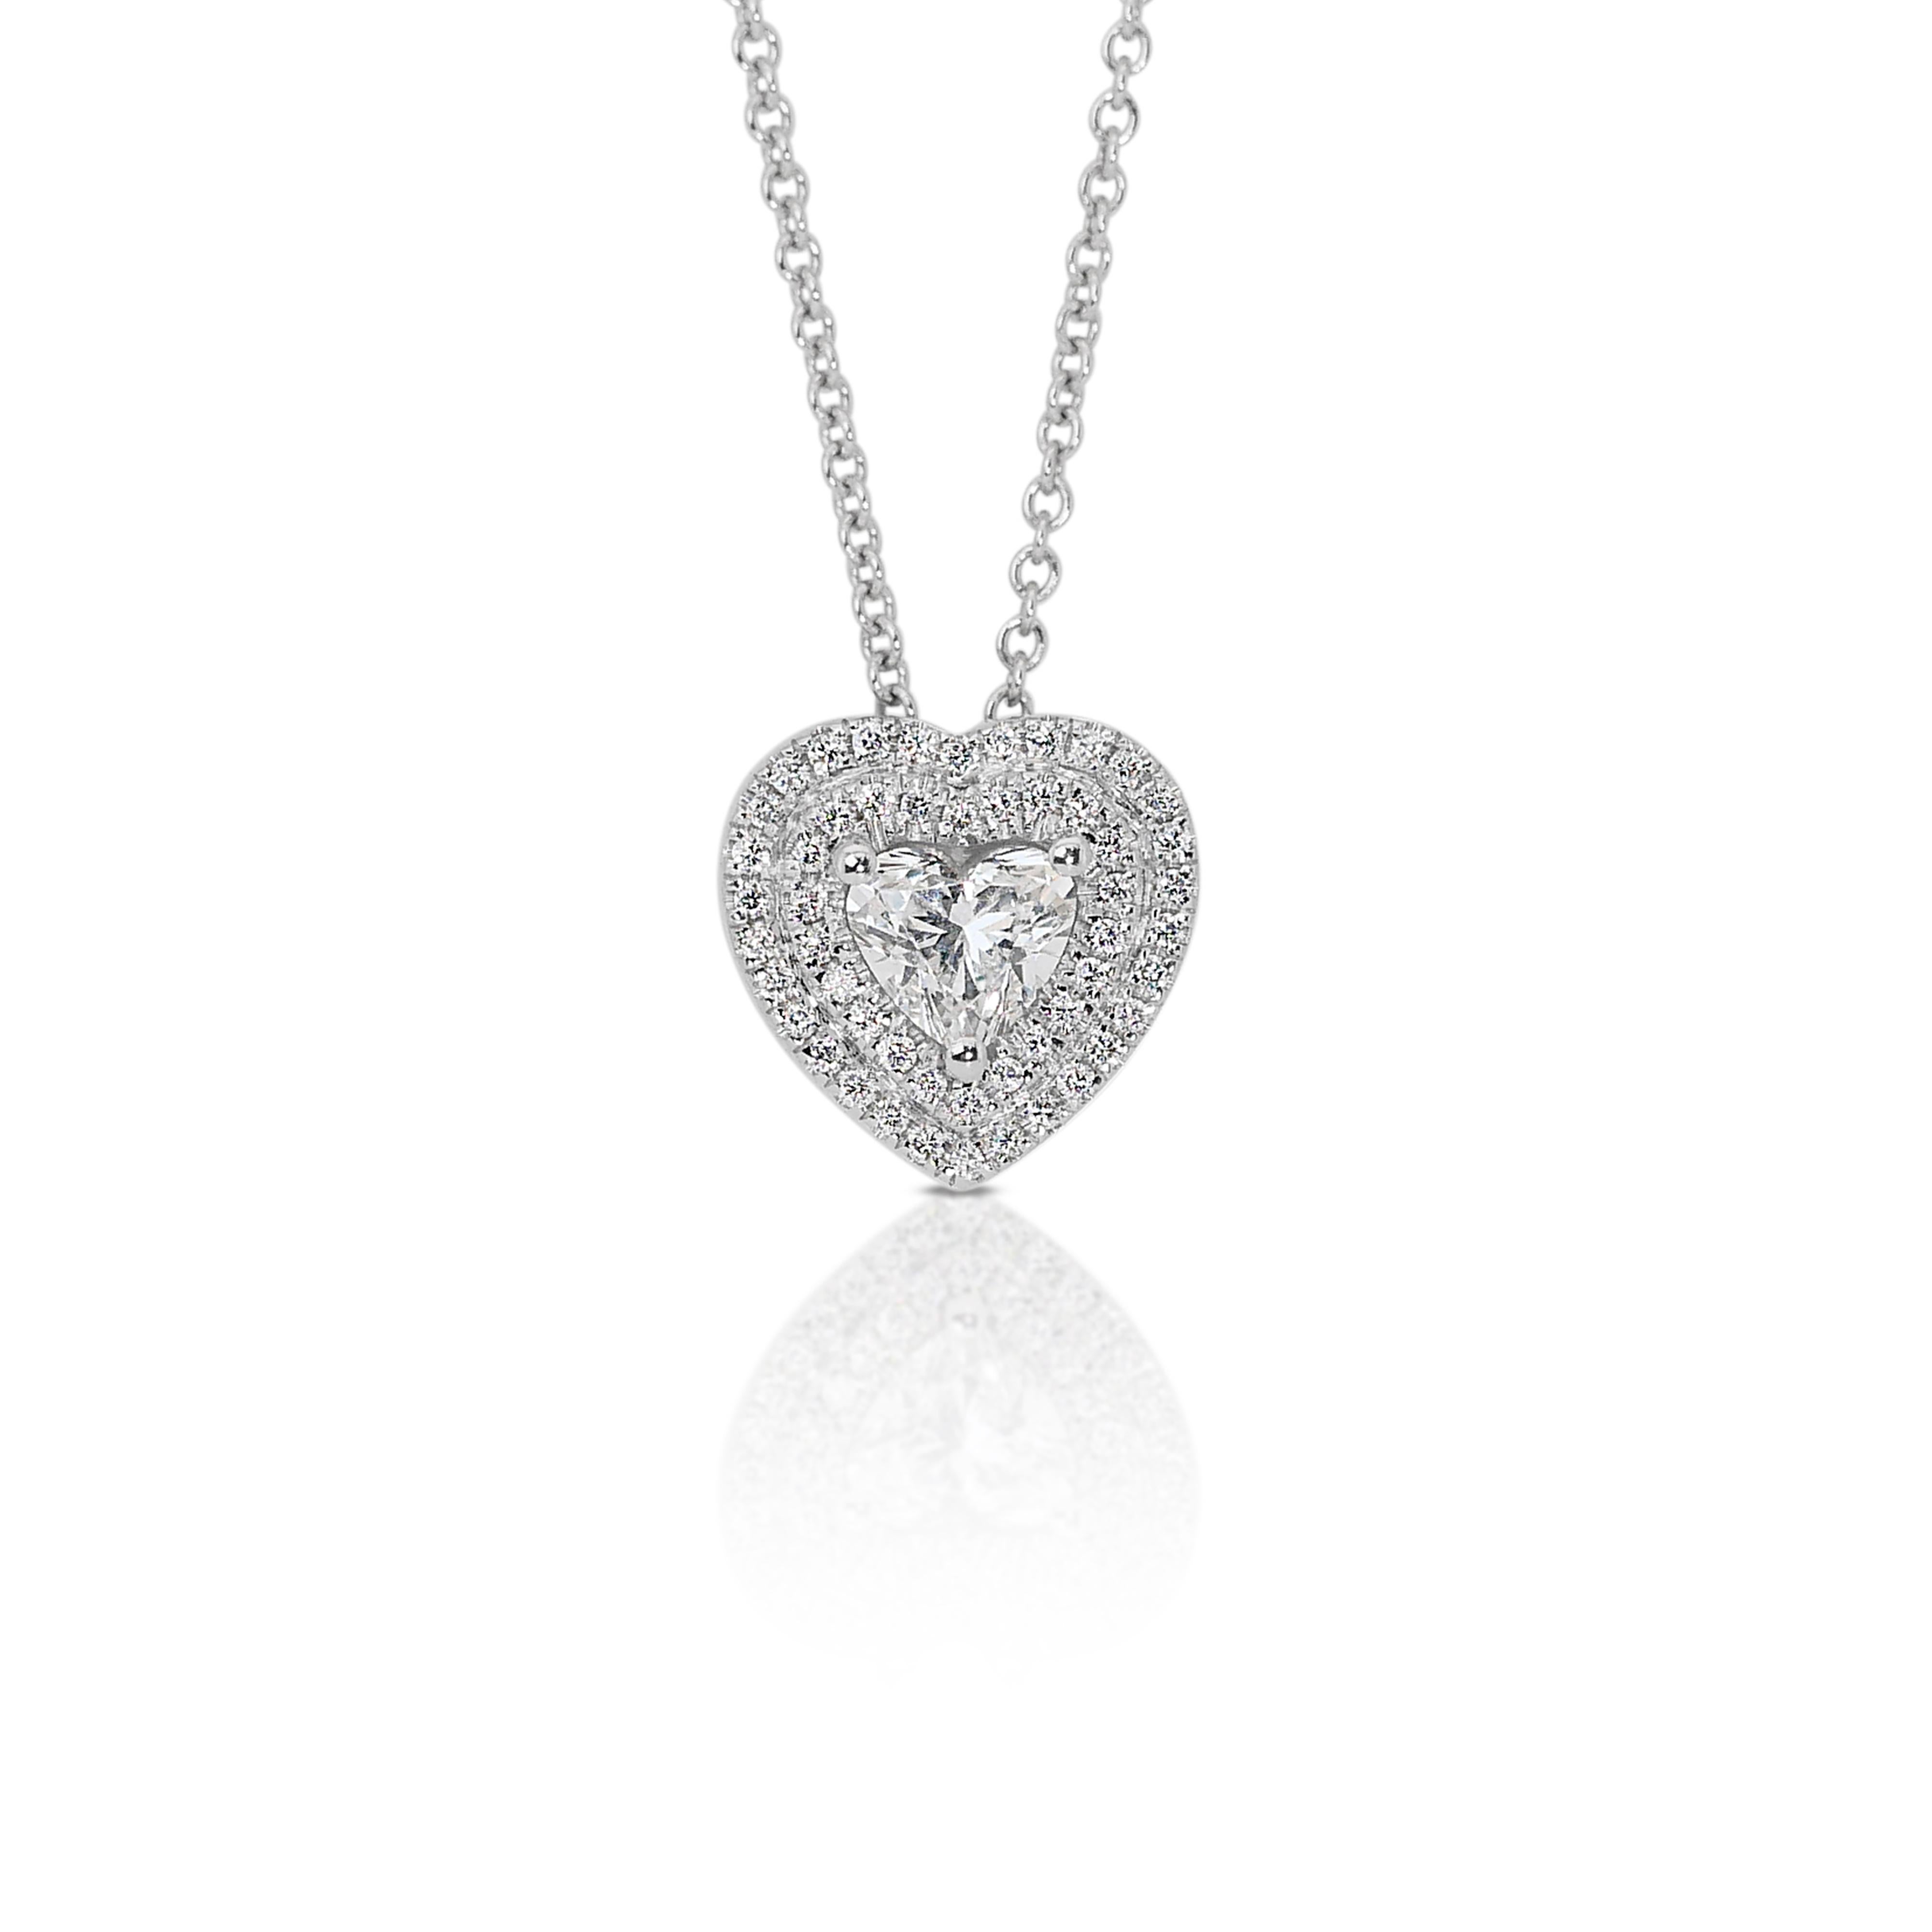 Heart Cut Elegant 0.80ct Heart-Shaped Diamond Halo Necklace in 18k White Gold - GIA Certif For Sale